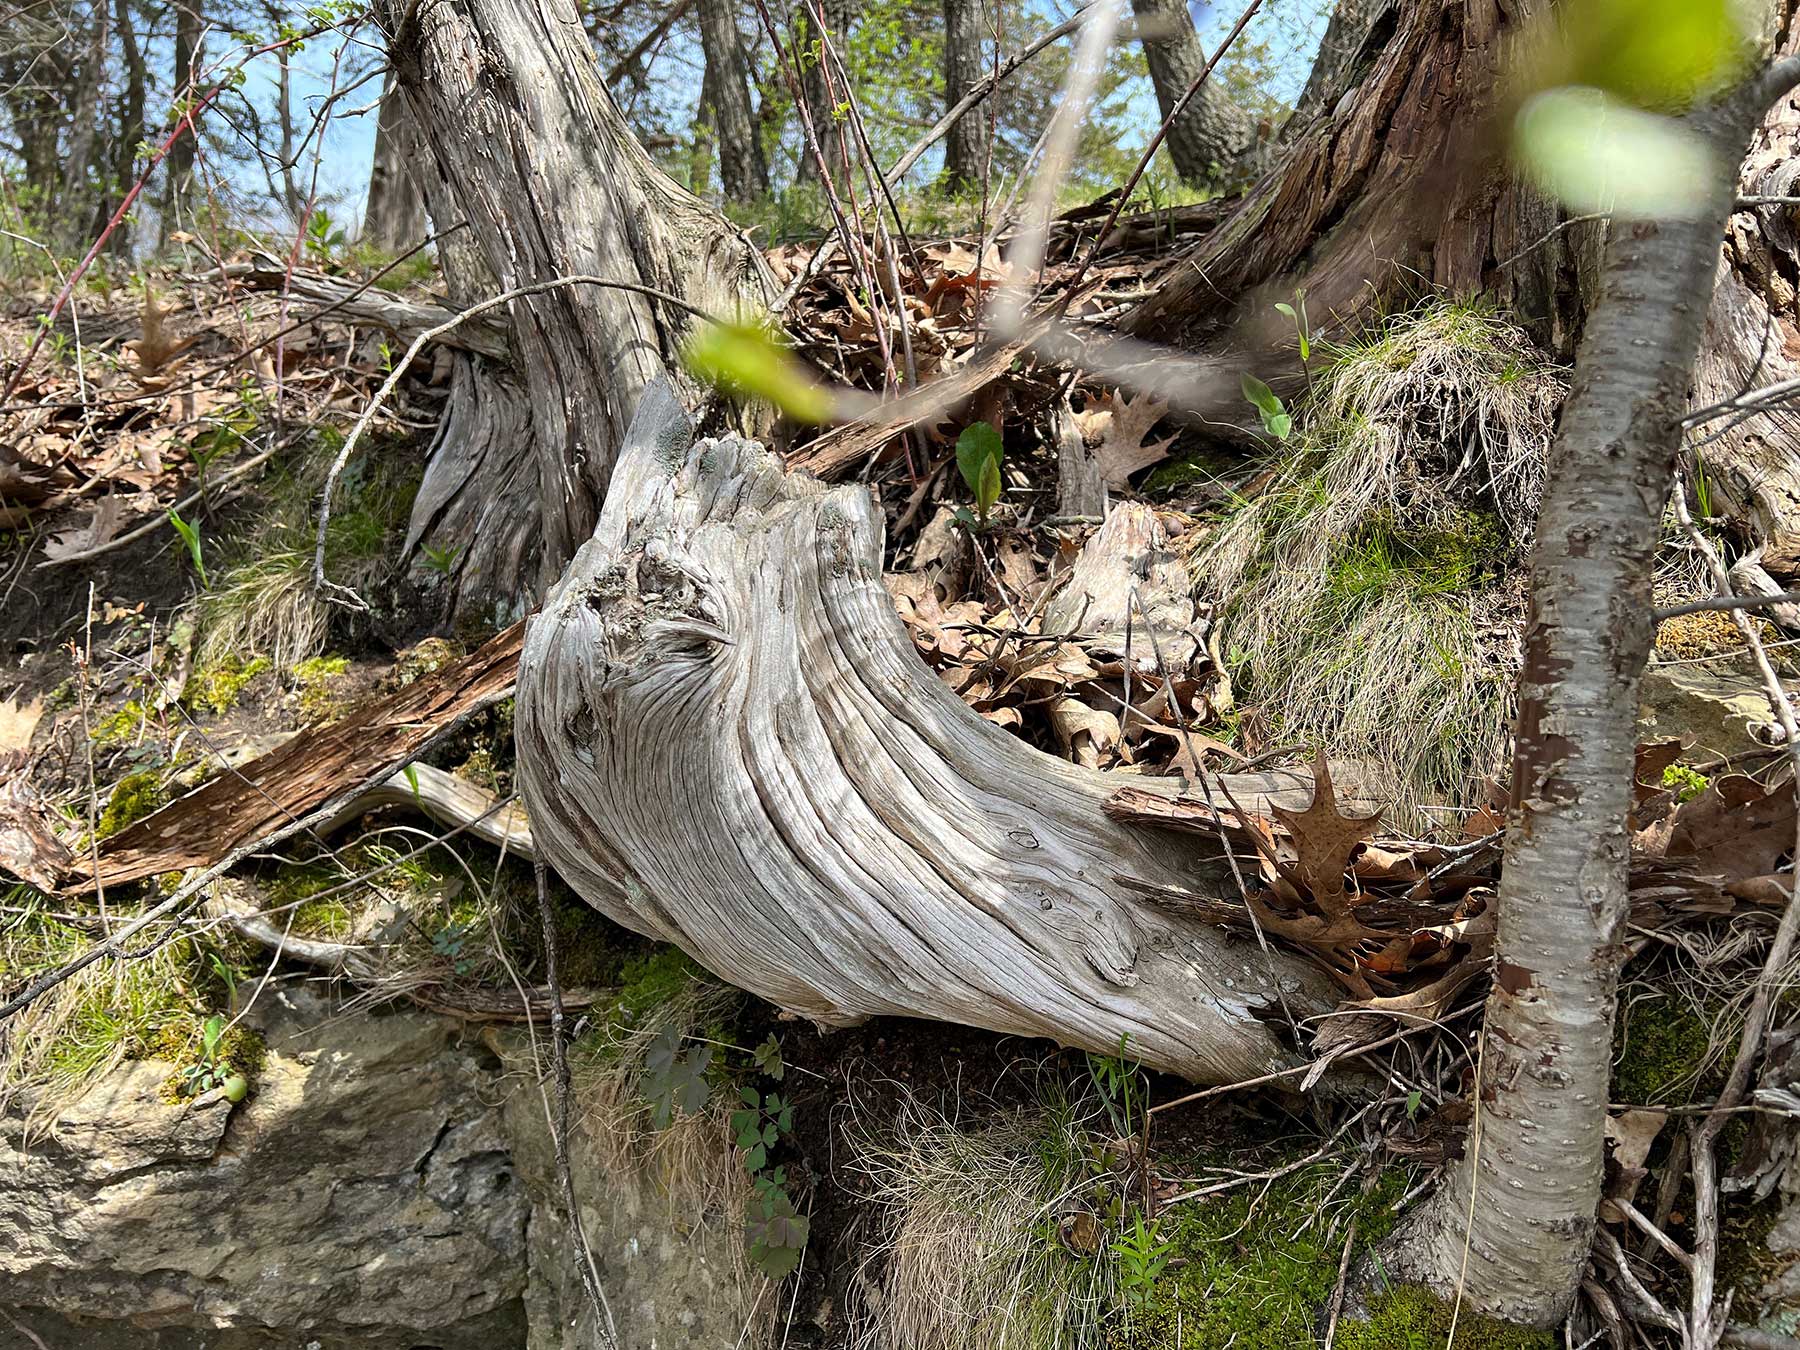 Example of an old, weathered stump.